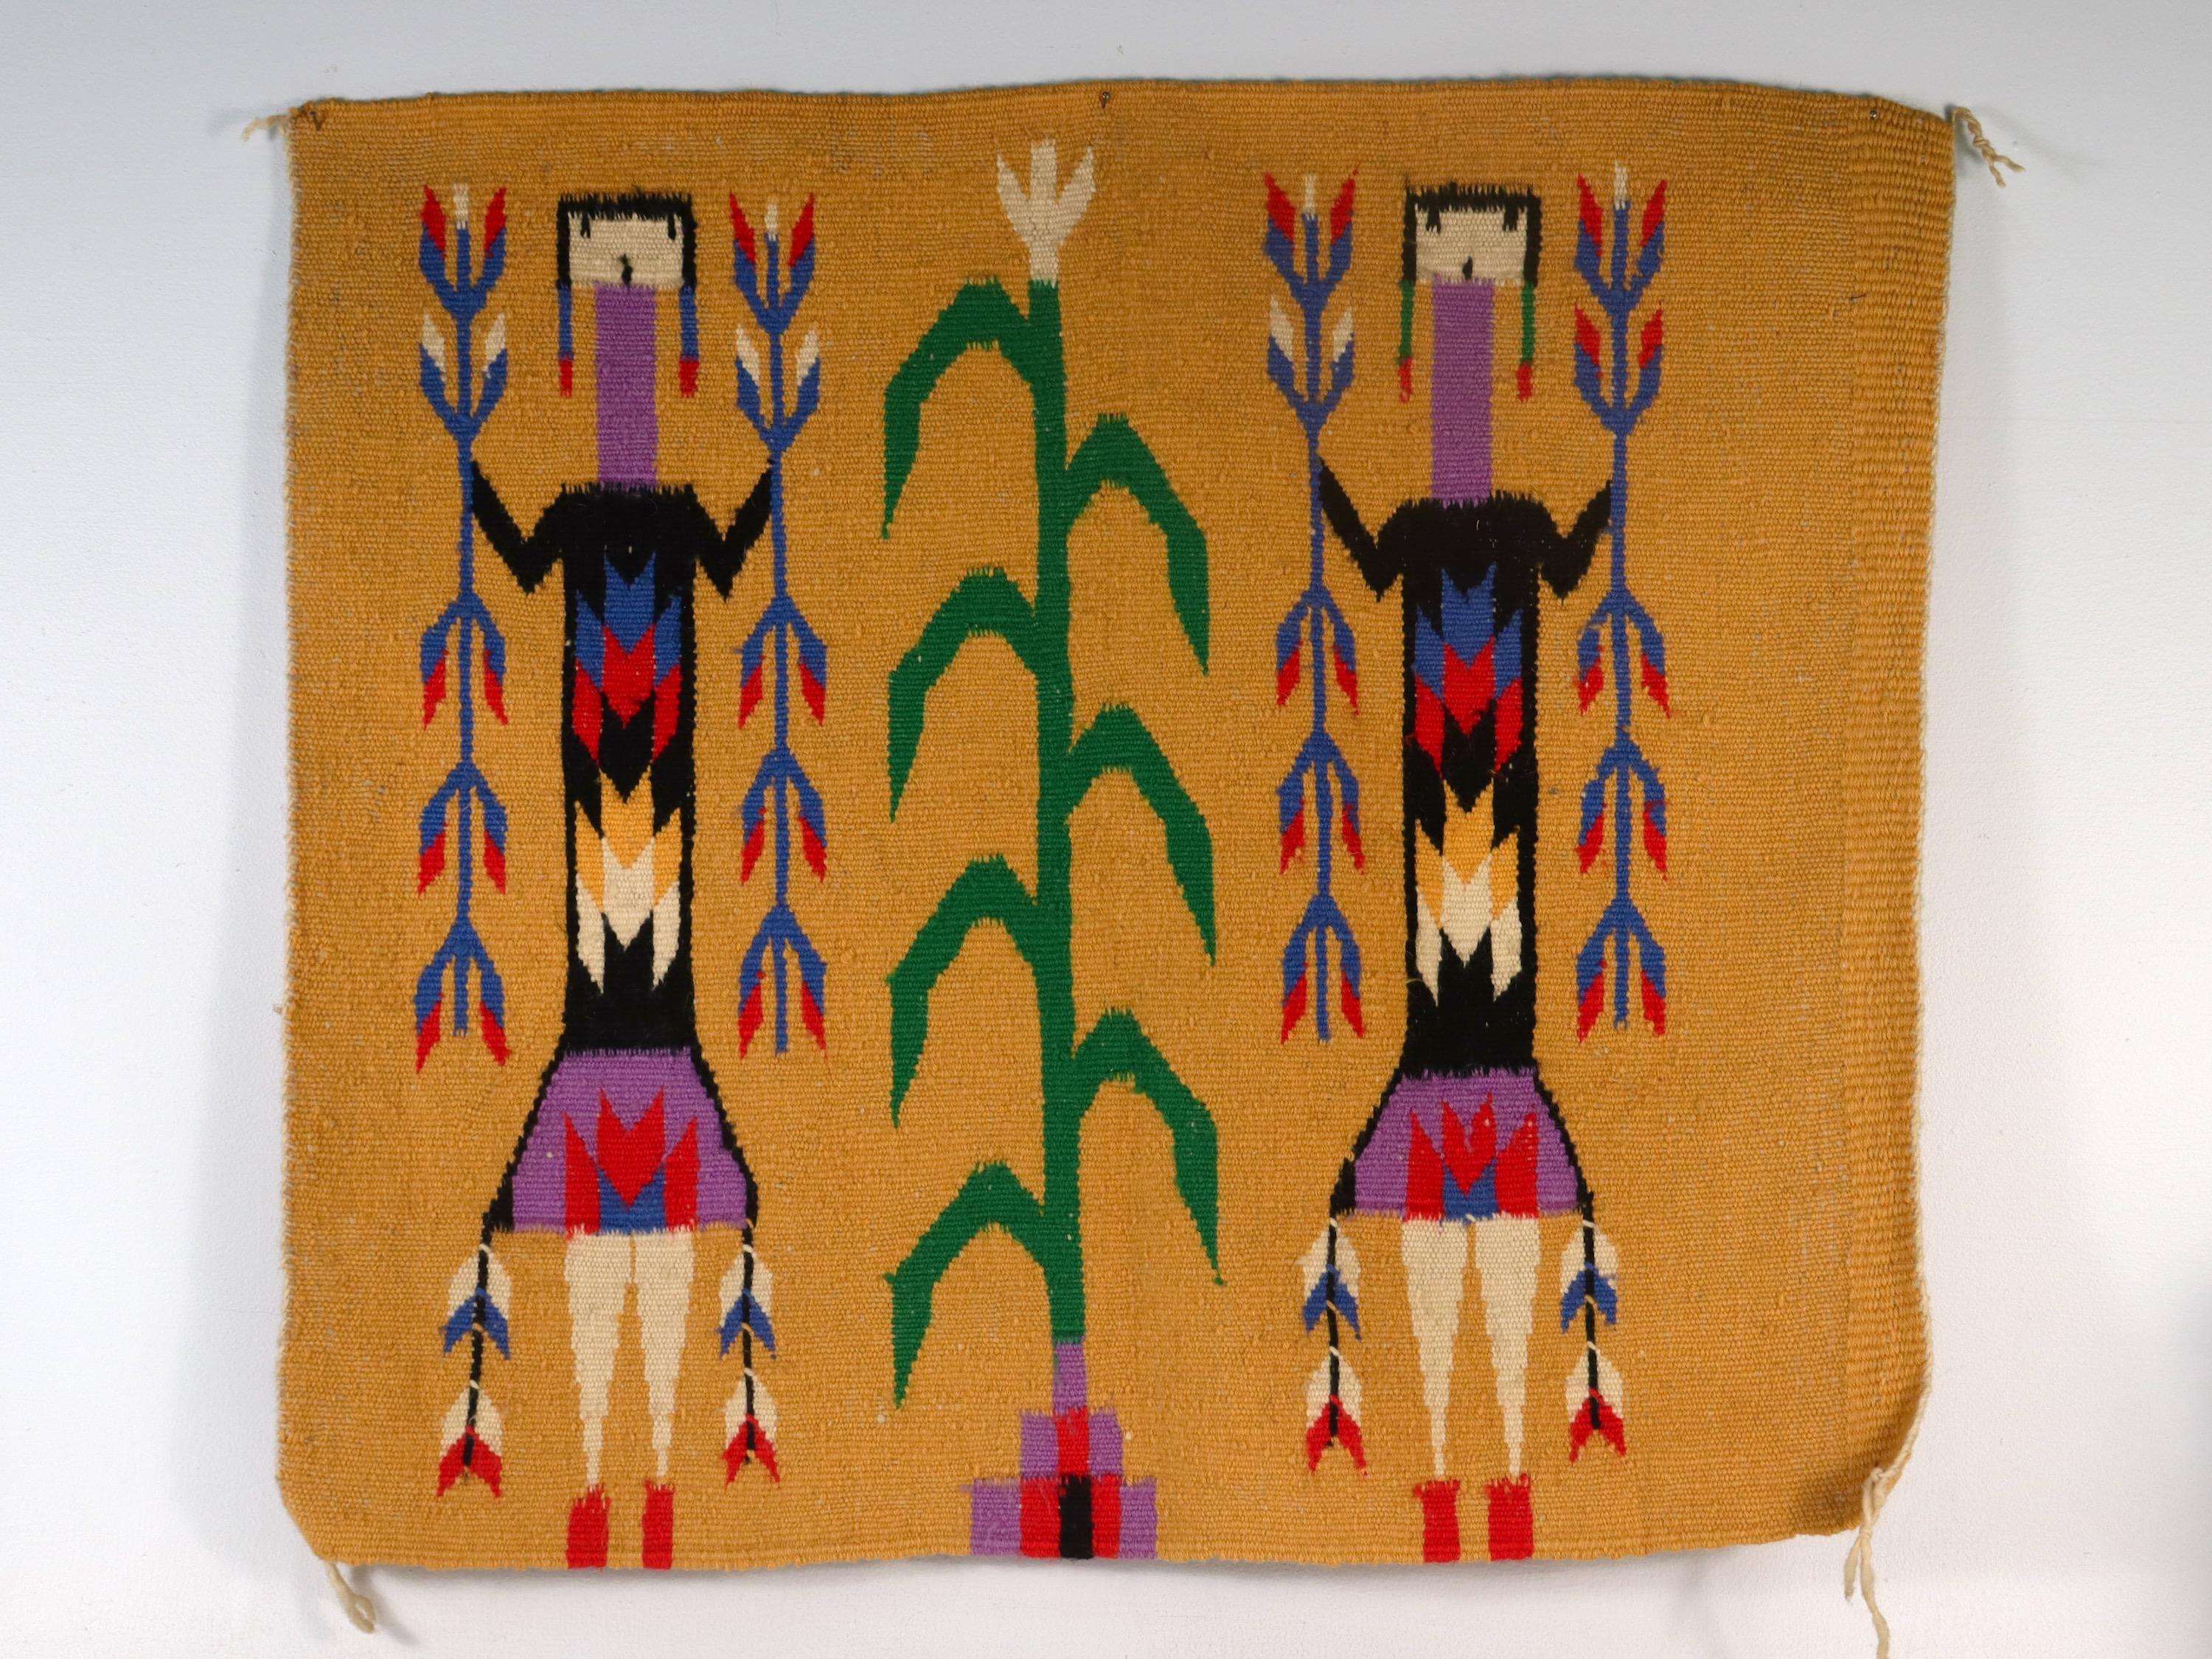 A fine wool Yei Navajo weaving.

In the form of a small rug or mat. (Potentially perfect for a large pillow top)

Depicting two corn people or deity figures flanking a cornstalk on a yellow/orange ground.

Found from a local Virginia